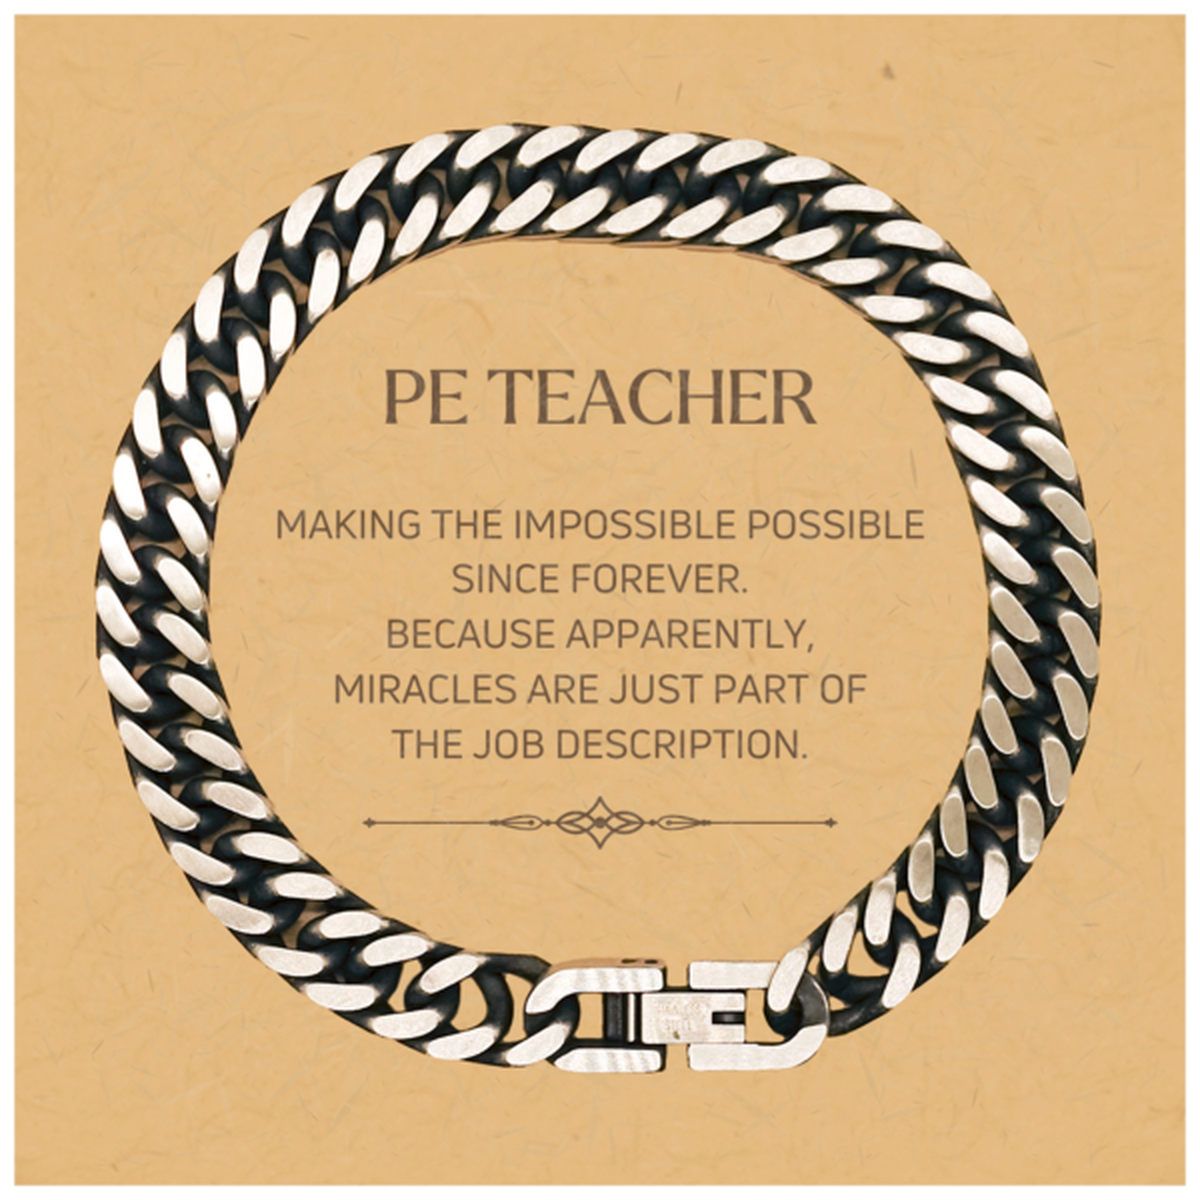 Funny PE Teacher Gifts, Miracles are just part of the job description, Inspirational Birthday Christmas Cuban Link Chain Bracelet For PE Teacher, Men, Women, Coworkers, Friends, Boss